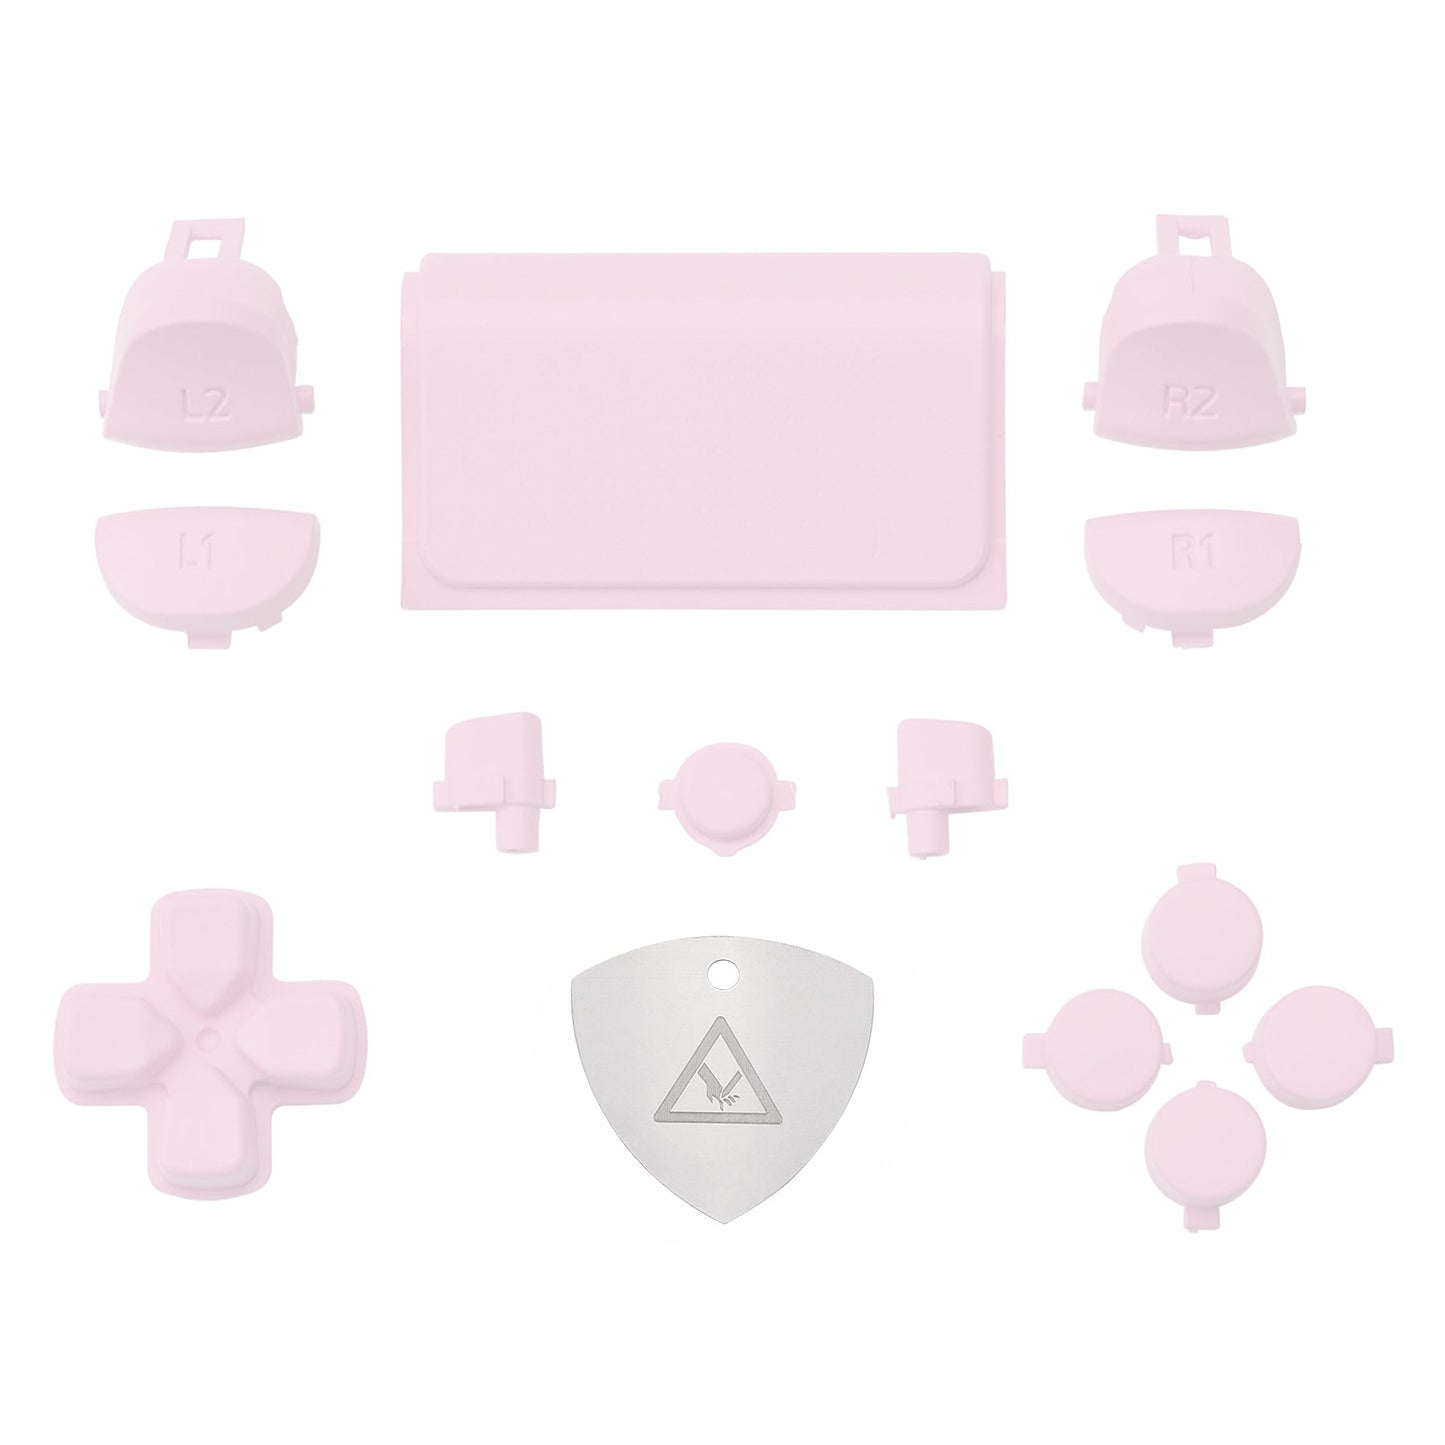 eXtremeRate Replacement D-pad R1 L1 ps4 Buttons Kit – R2 for Touchpad for Slim Triggers Controller, Buttons Set Repair Action Controller Cherry Blossoms Options ps4 Share Pink eXtremeRate Full Home Pro L2